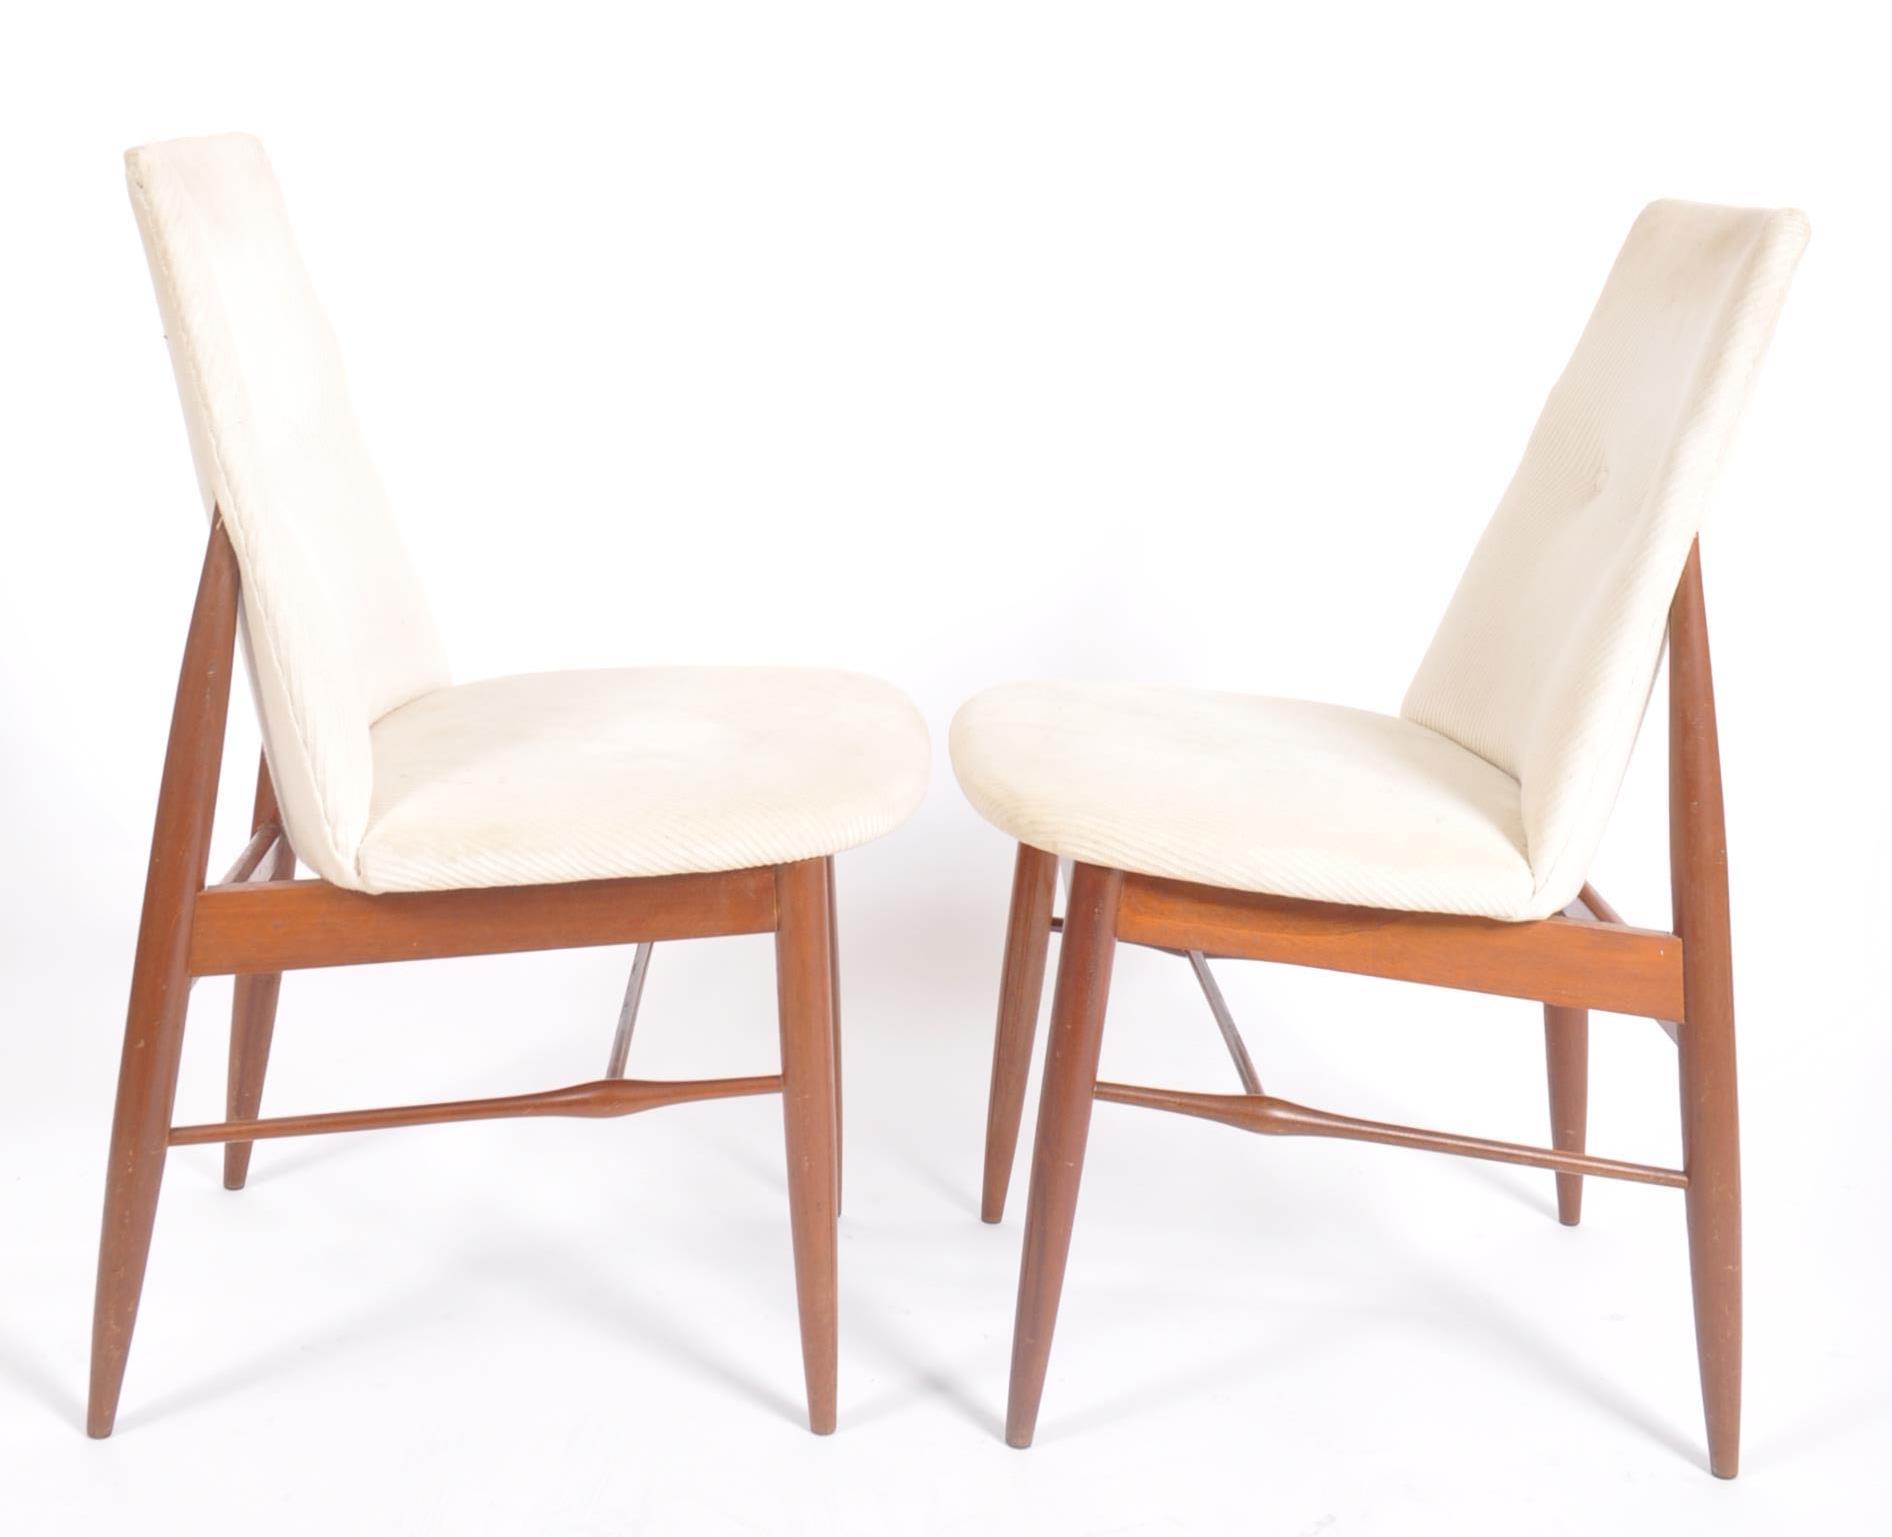 PETER HAYWARD FOR VANSON - MATCHING SET OF FOUR DINING CHAIRS - Image 6 of 7